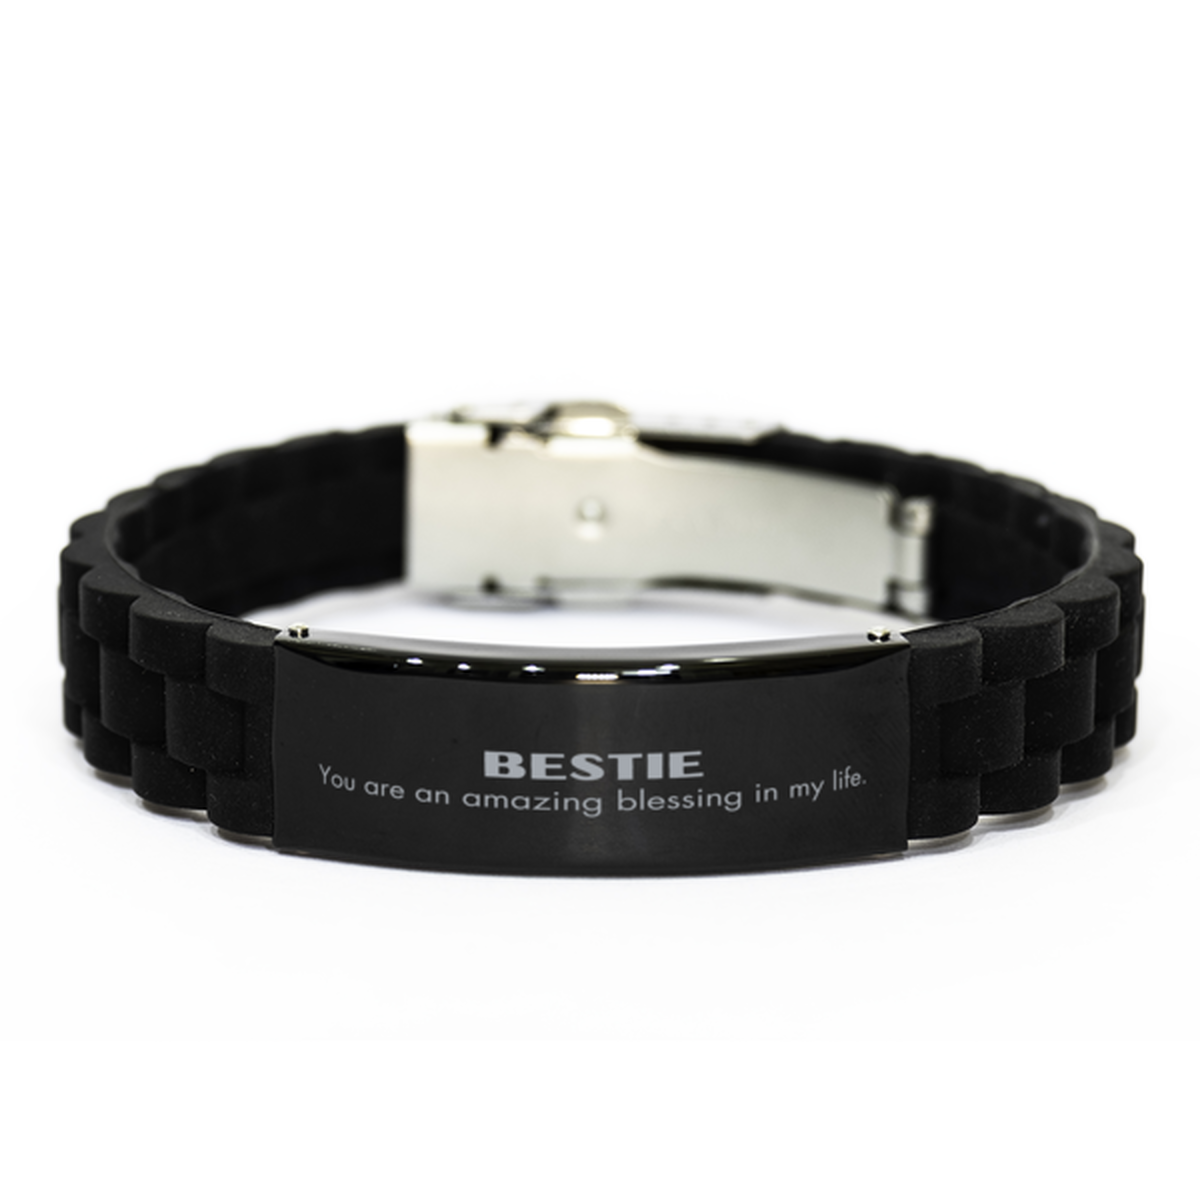 Bestie Black Glidelock Clasp Bracelet, You are an amazing blessing in my life, Thank You Gifts For Bestie, Inspirational Birthday Christmas Unique Gifts For Bestie